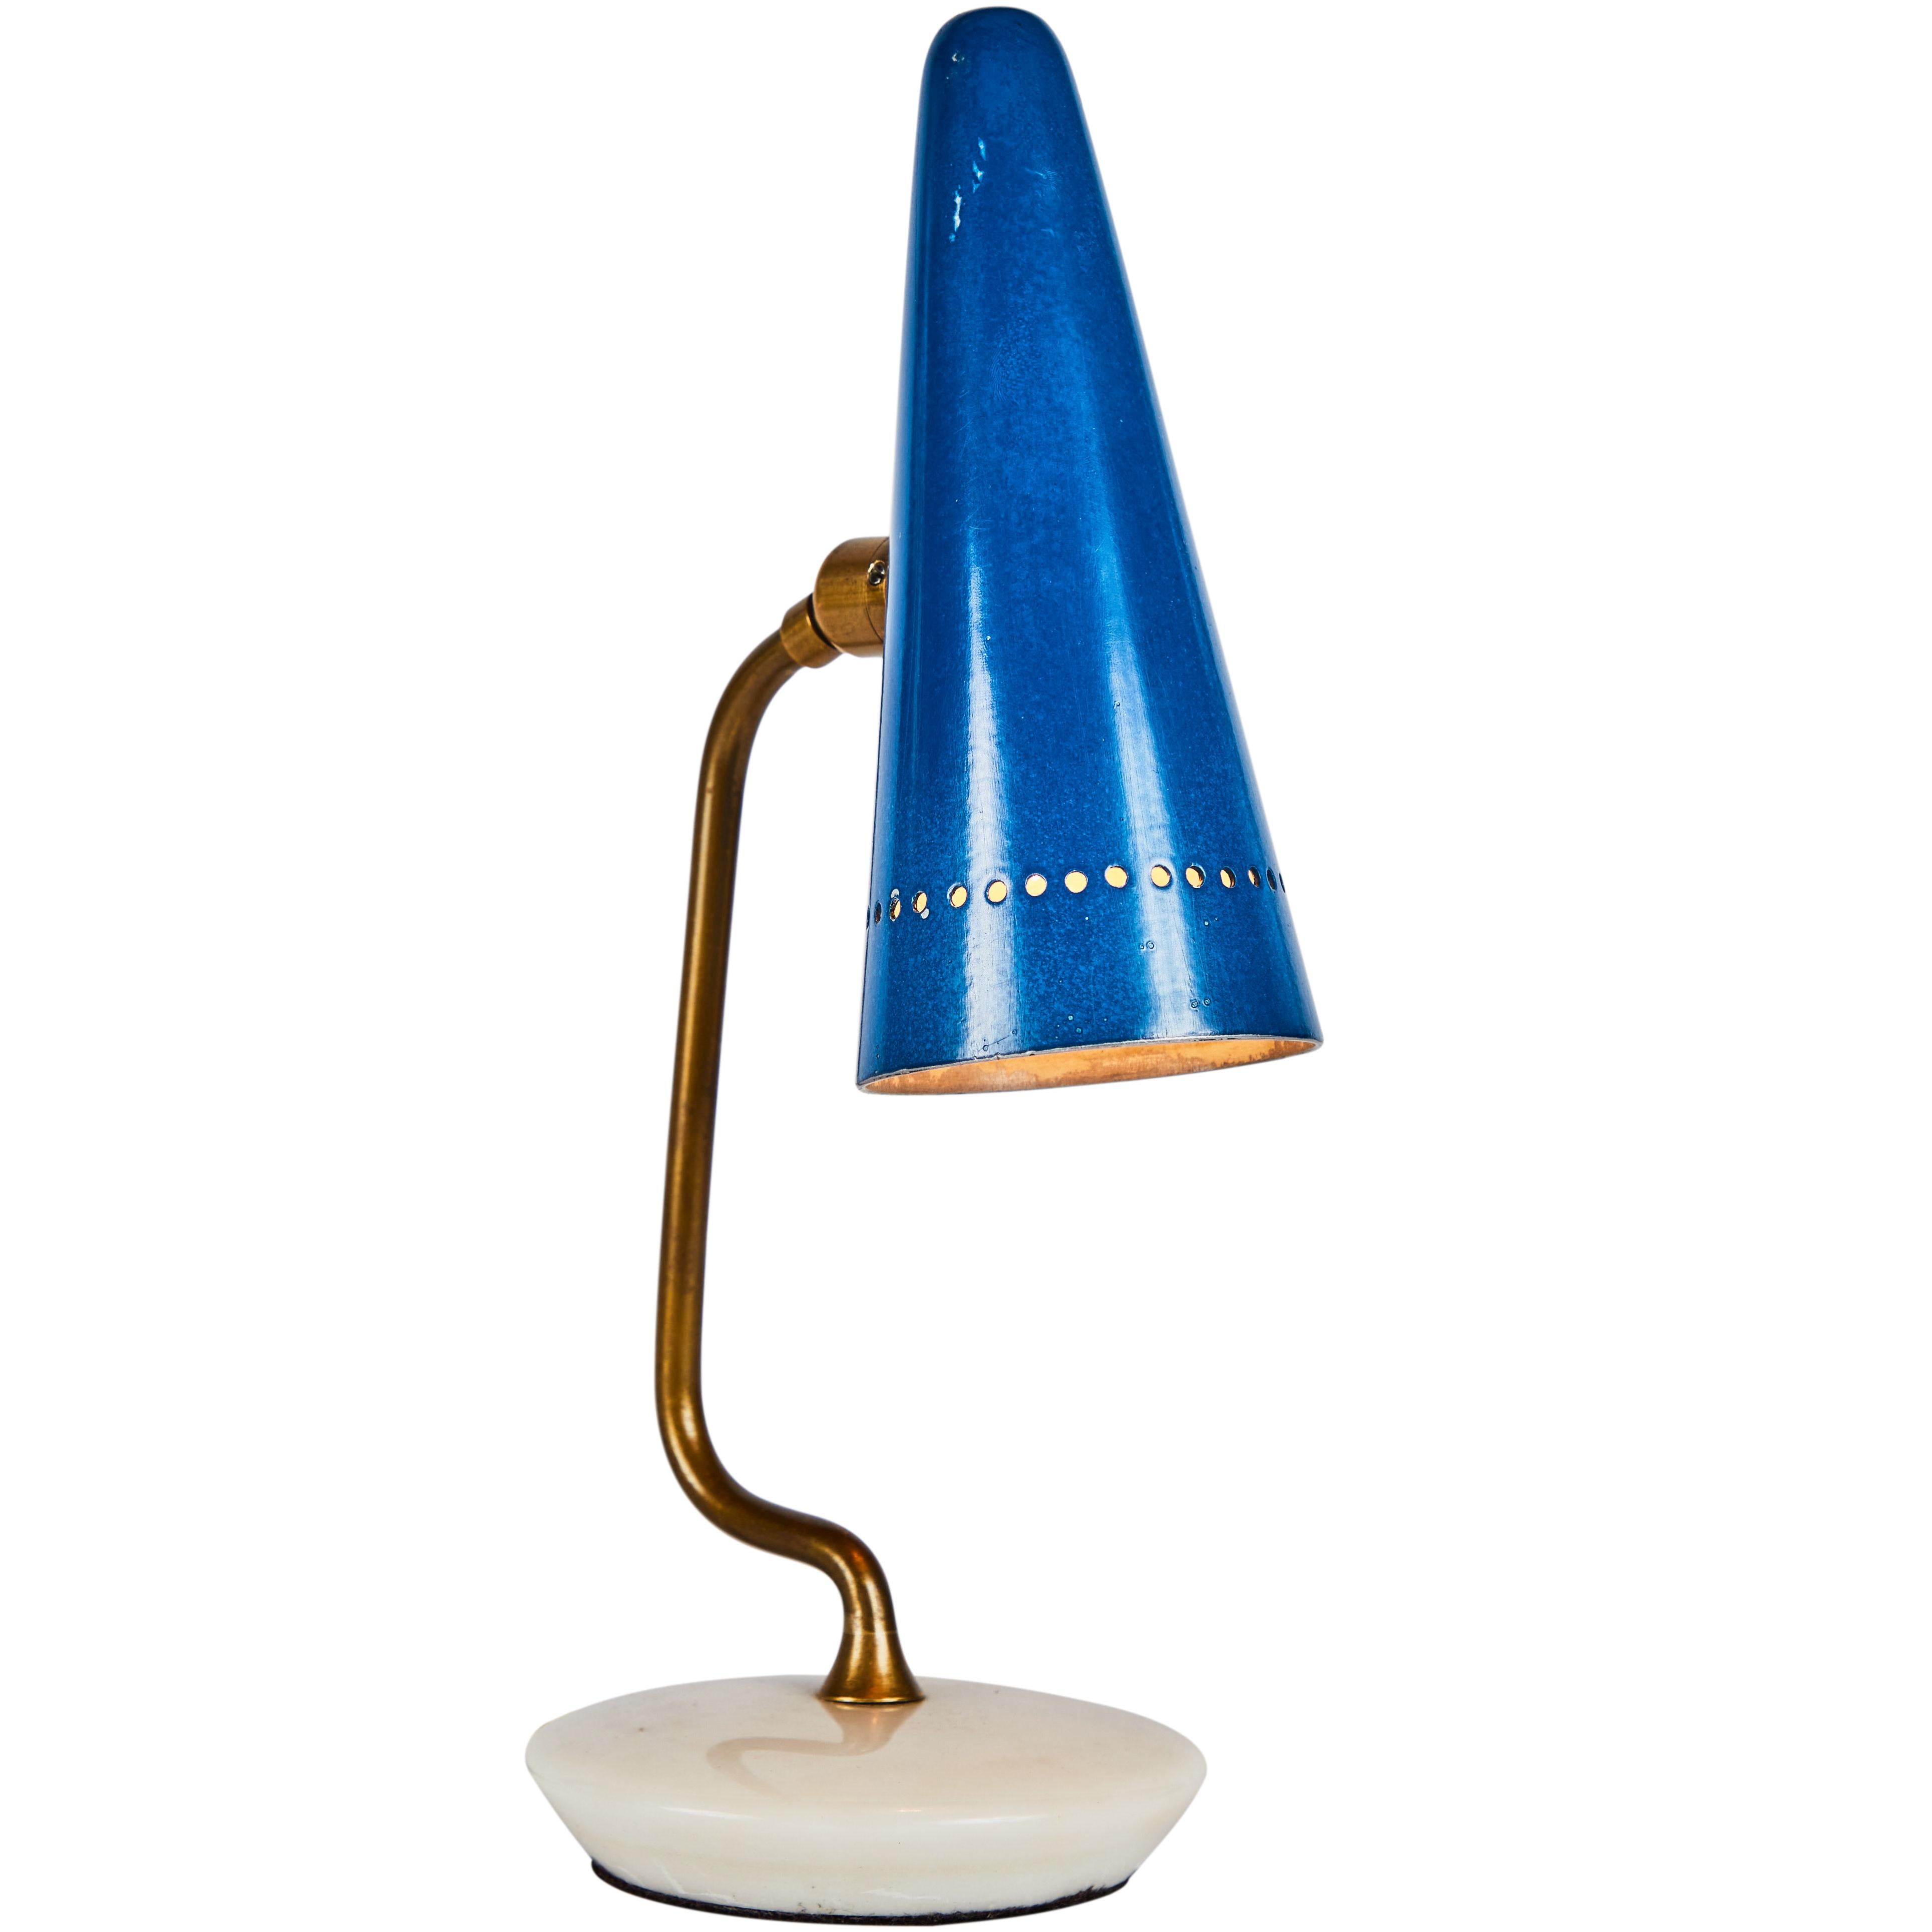 1950s table lamp attributed to Gino Sarfatti for Arteluce. This extremely refined and sculptural design retains its wonderfully knackered original blue painted aluminum shade brass hardware and marble base. The cone shade rotates on a brass swivel